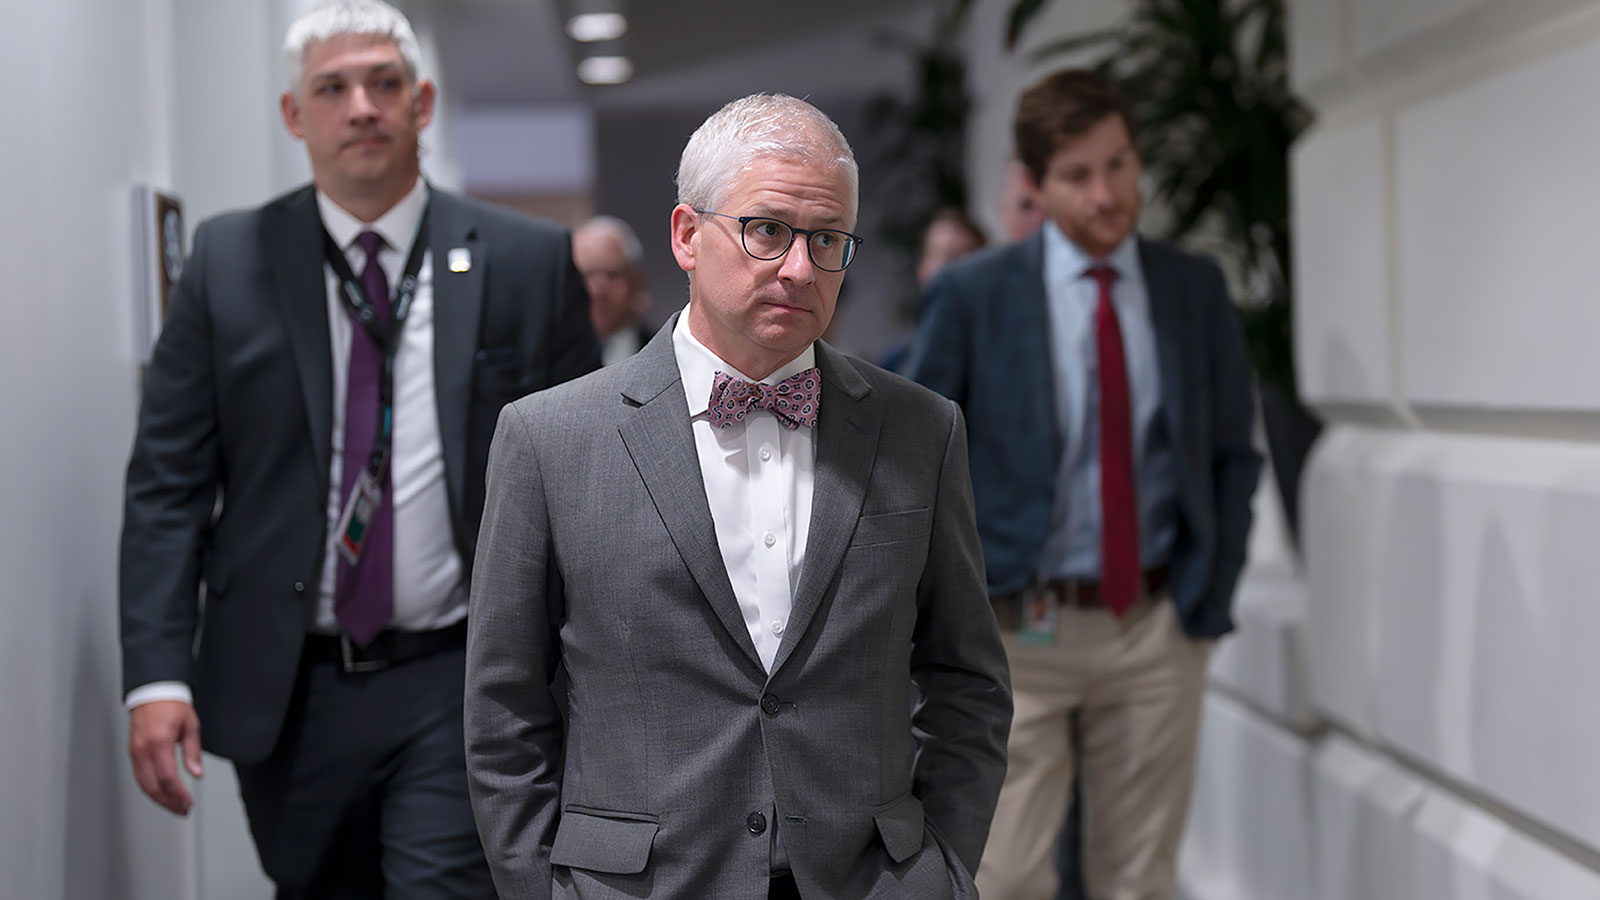 McHenry walks to a meeting of the House Republican Conference after former House Speaker Kevin McCarthy was voted out , on Tuesday, October 3.